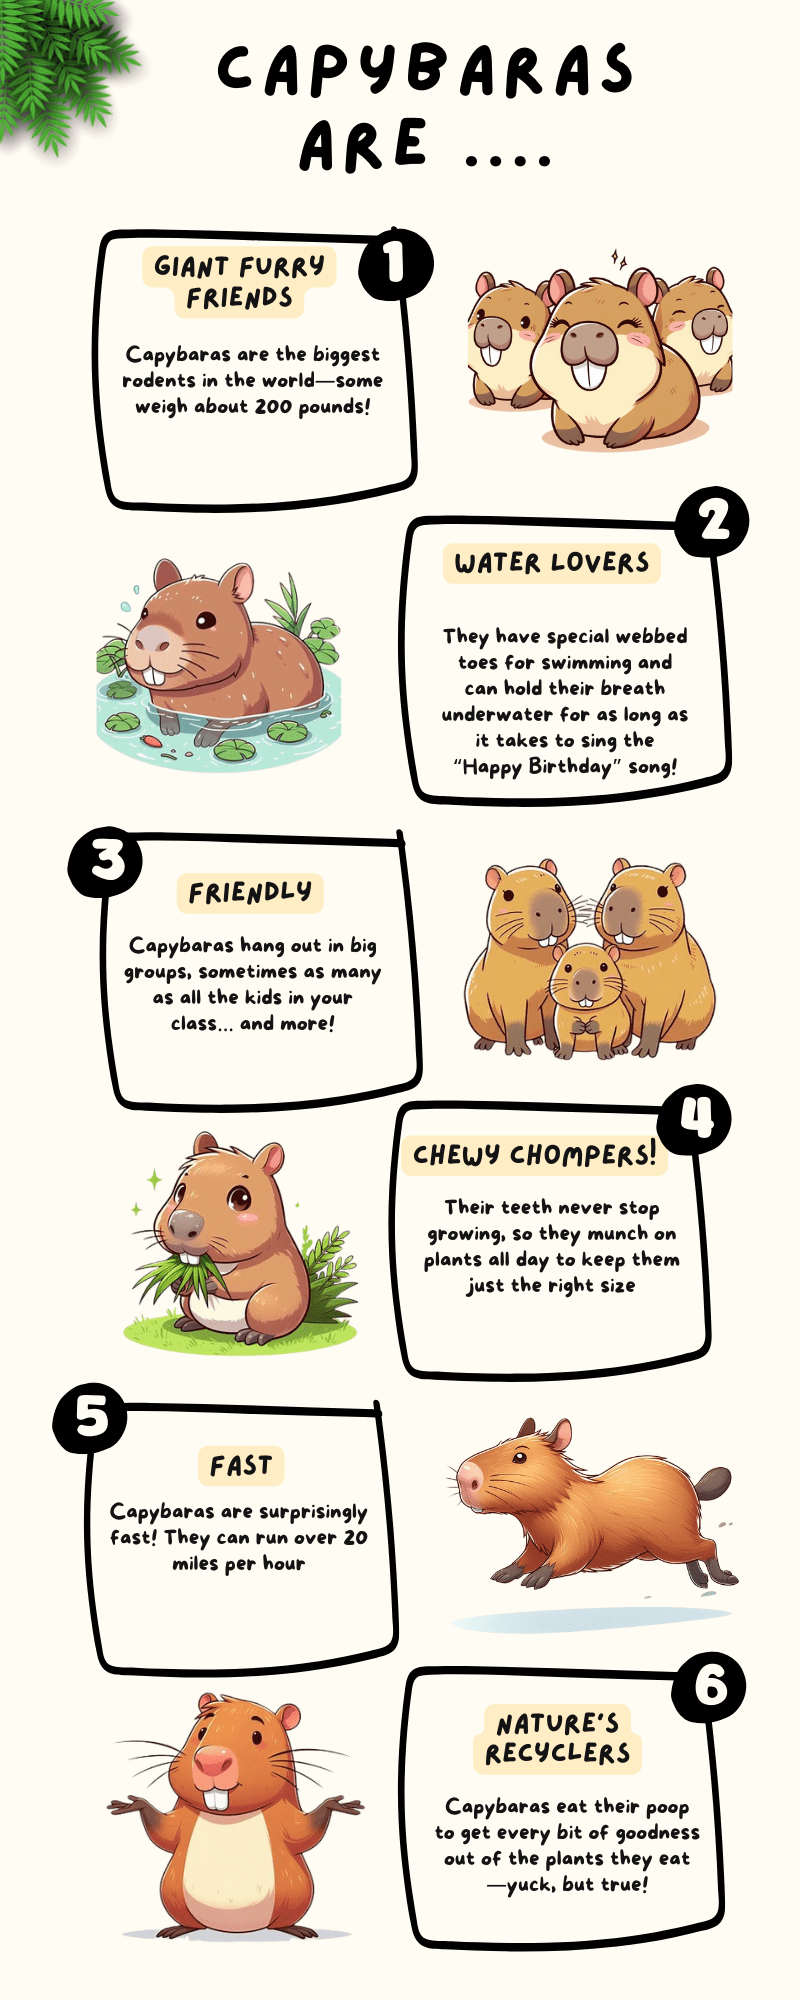 an downloadable infographic about capybaras